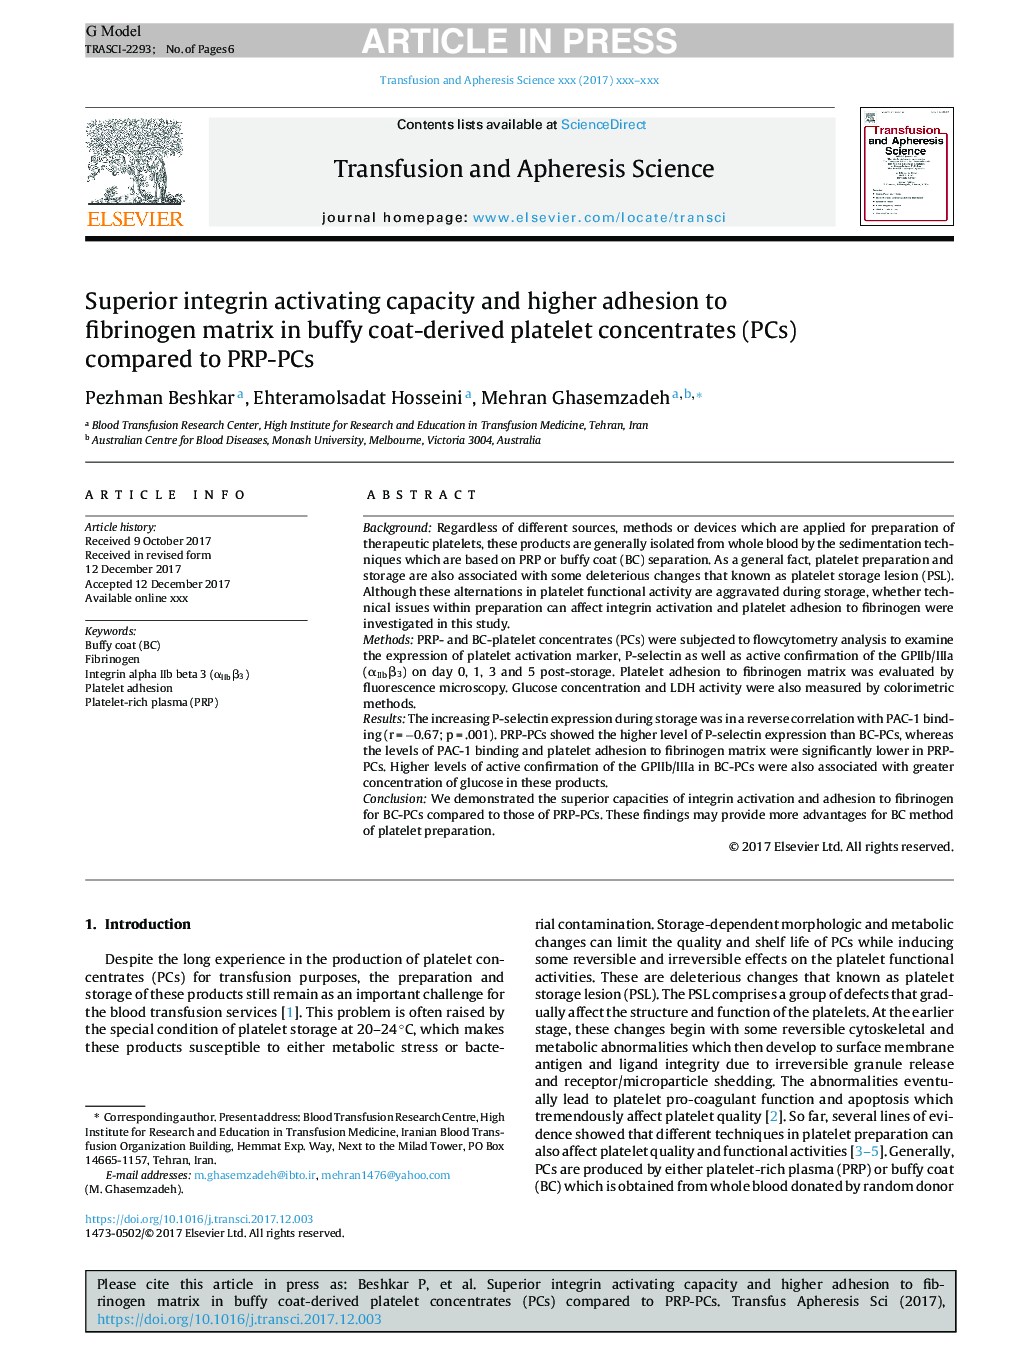 Superior integrin activating capacity and higher adhesion to fibrinogen matrix in buffy coat-derived platelet concentrates (PCs) compared to PRP-PCs